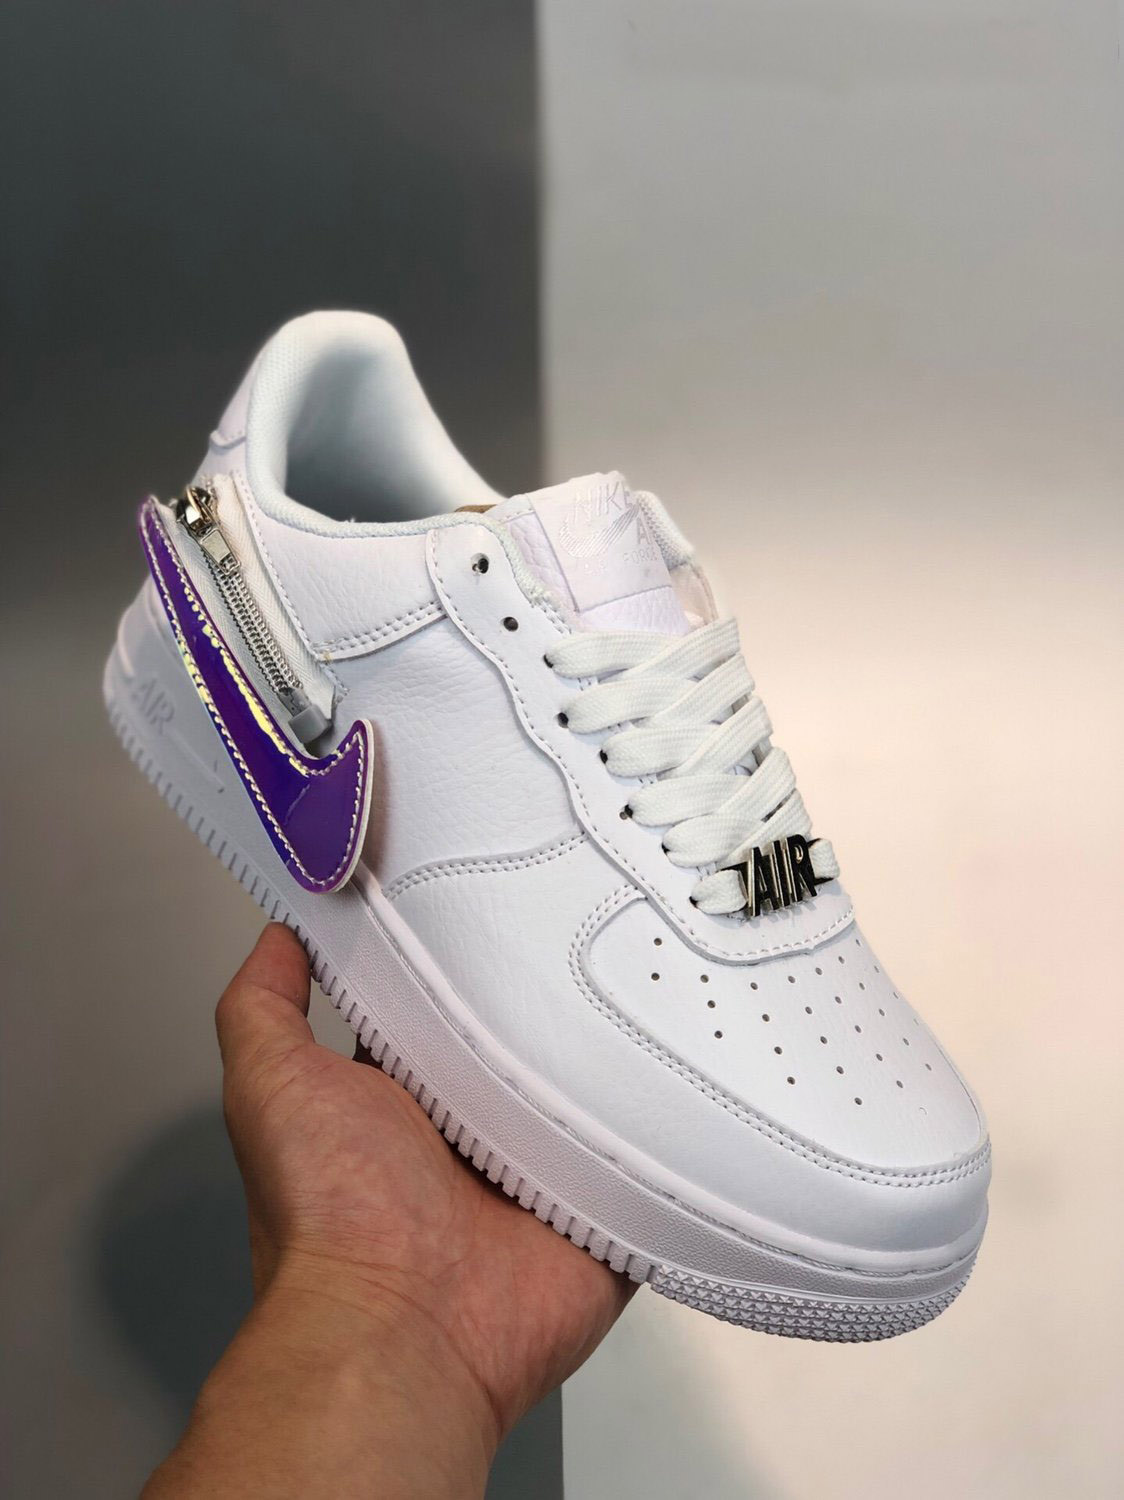 Nike Air Force 1 Zip-On Swoosh Logo White CW6558-100 For Sale 